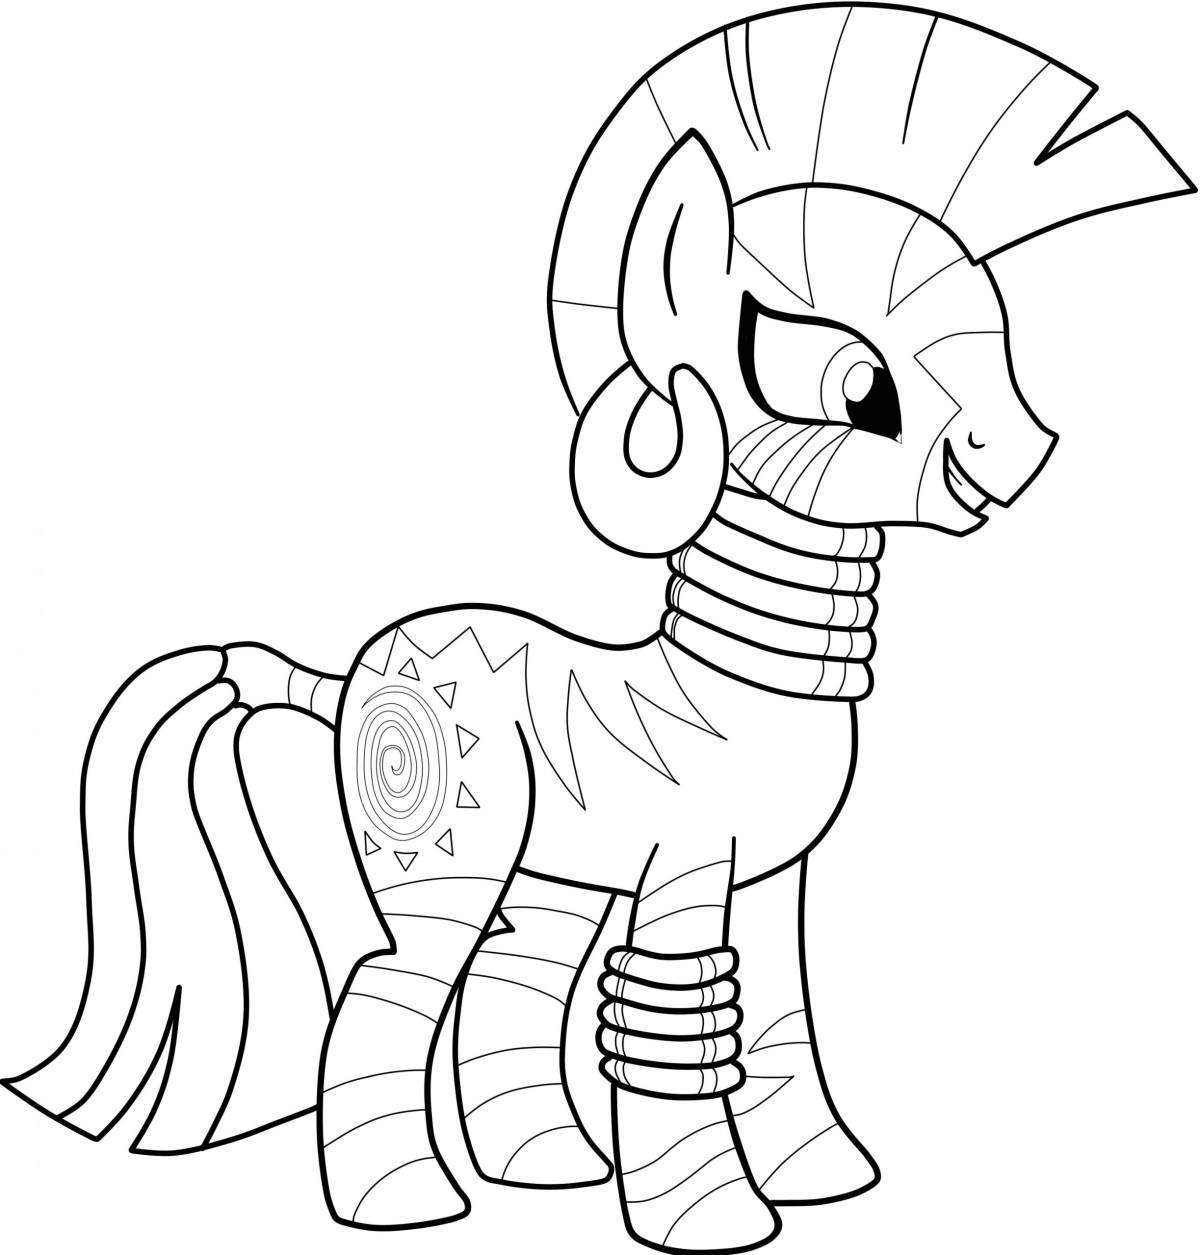 Awesome pony coloring pages for kids